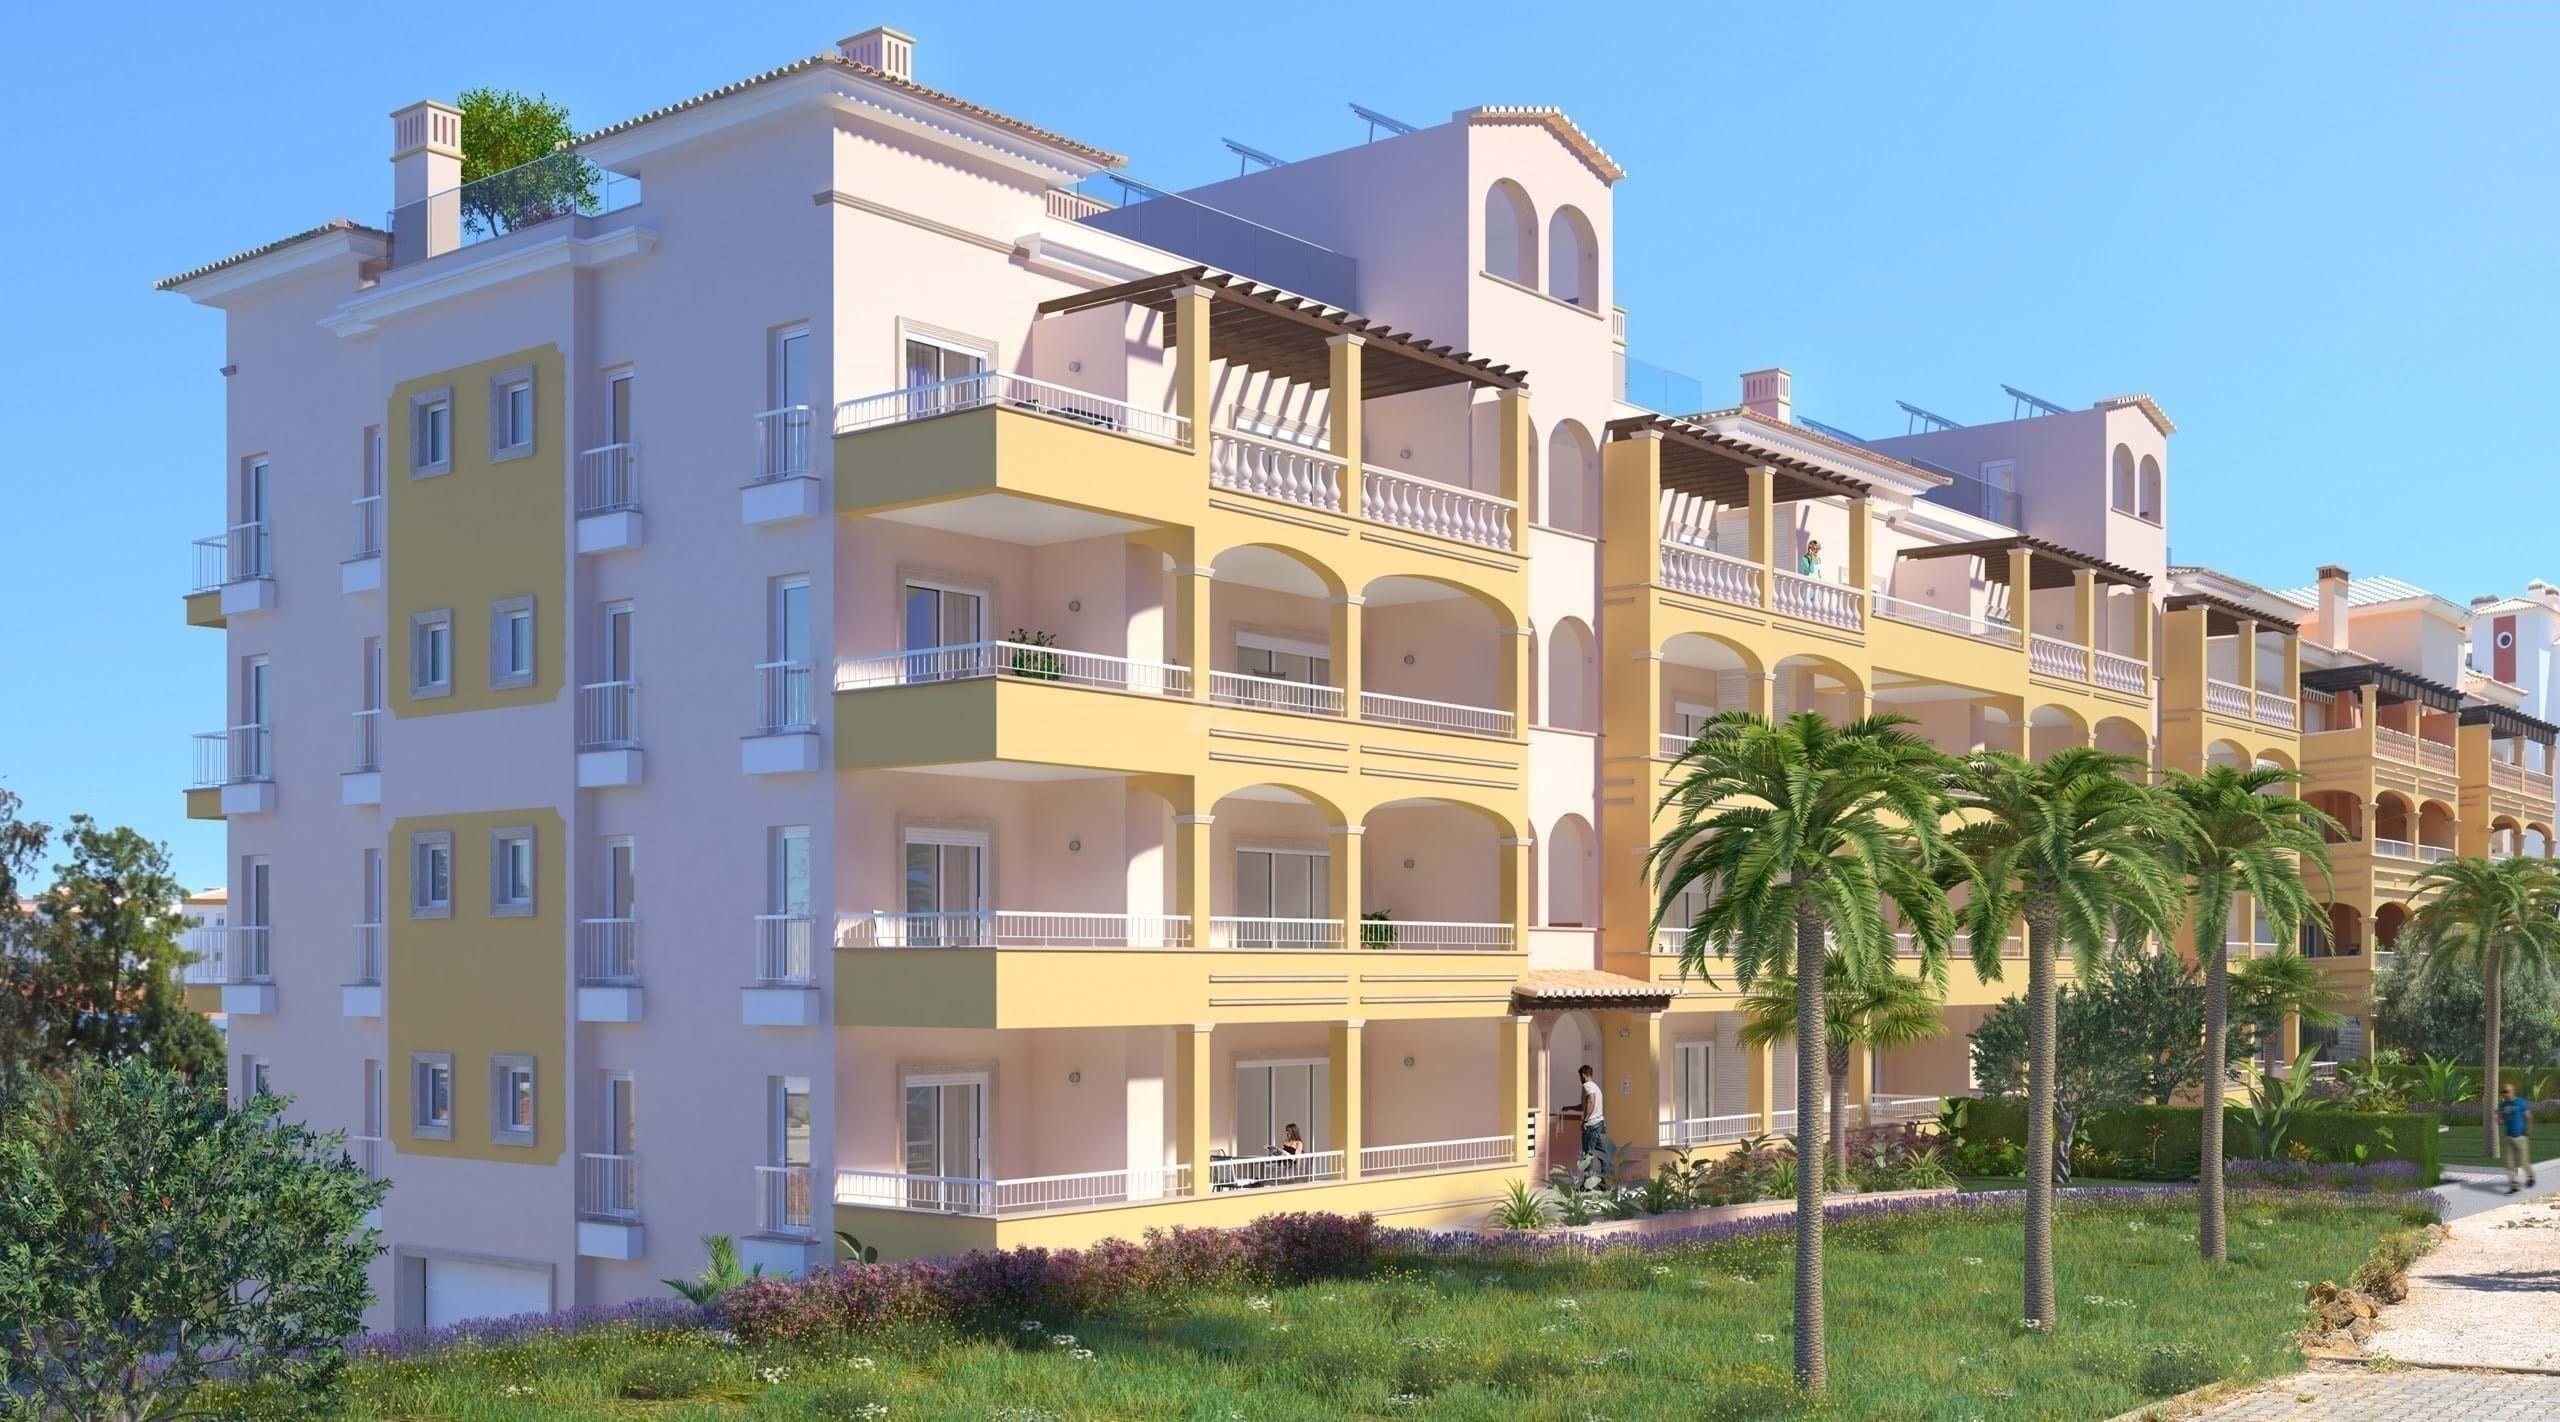  Apartment development project Lagos T2 Accommodation in Lagos